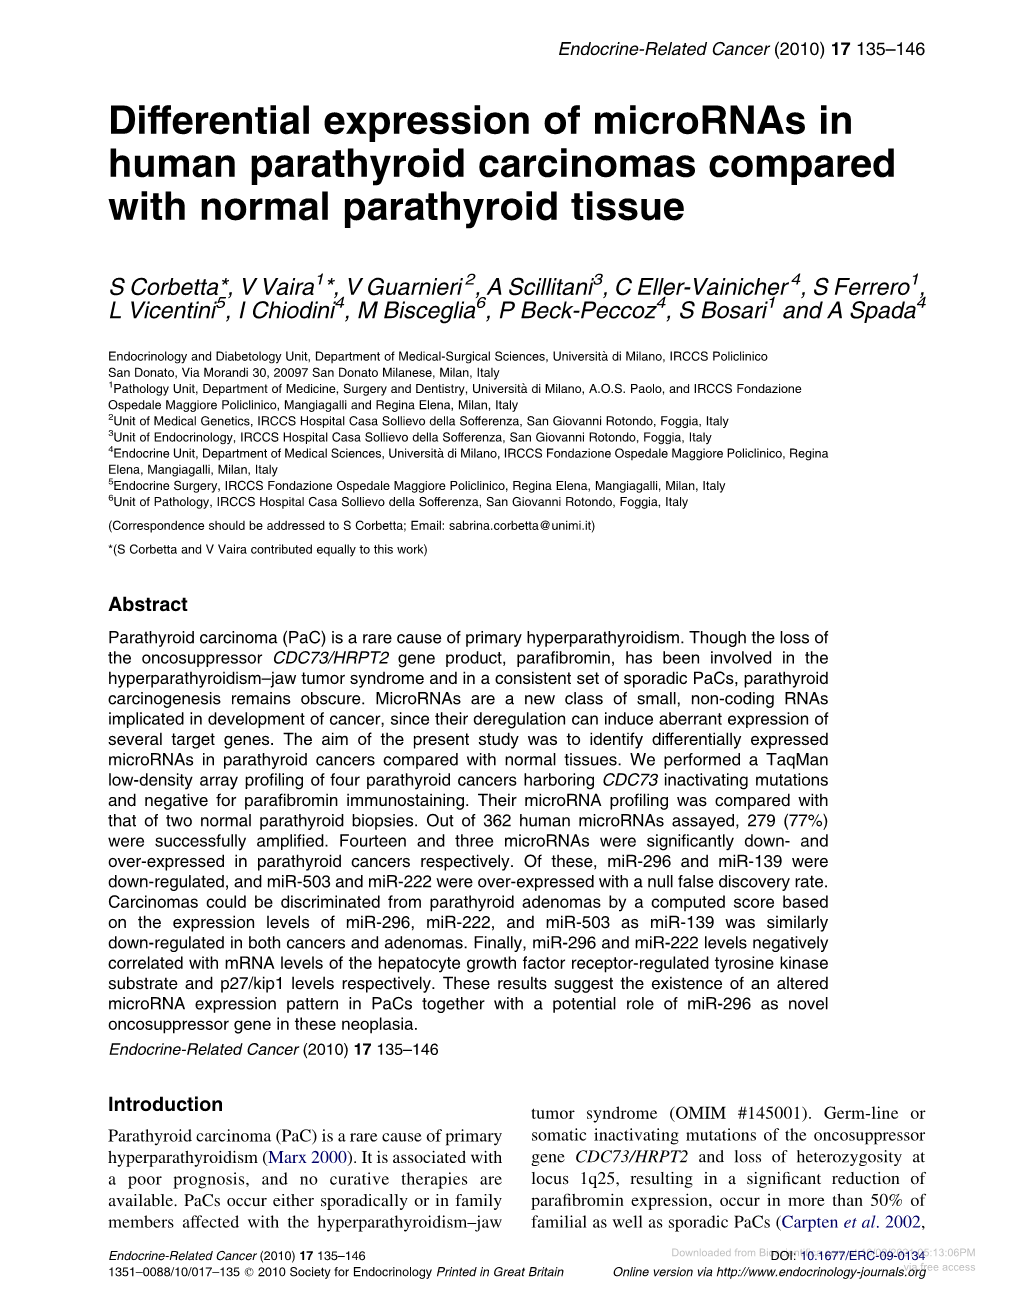 Differential Expression of Micrornas in Human Parathyroid Carcinomas Compared with Normal Parathyroid Tissue